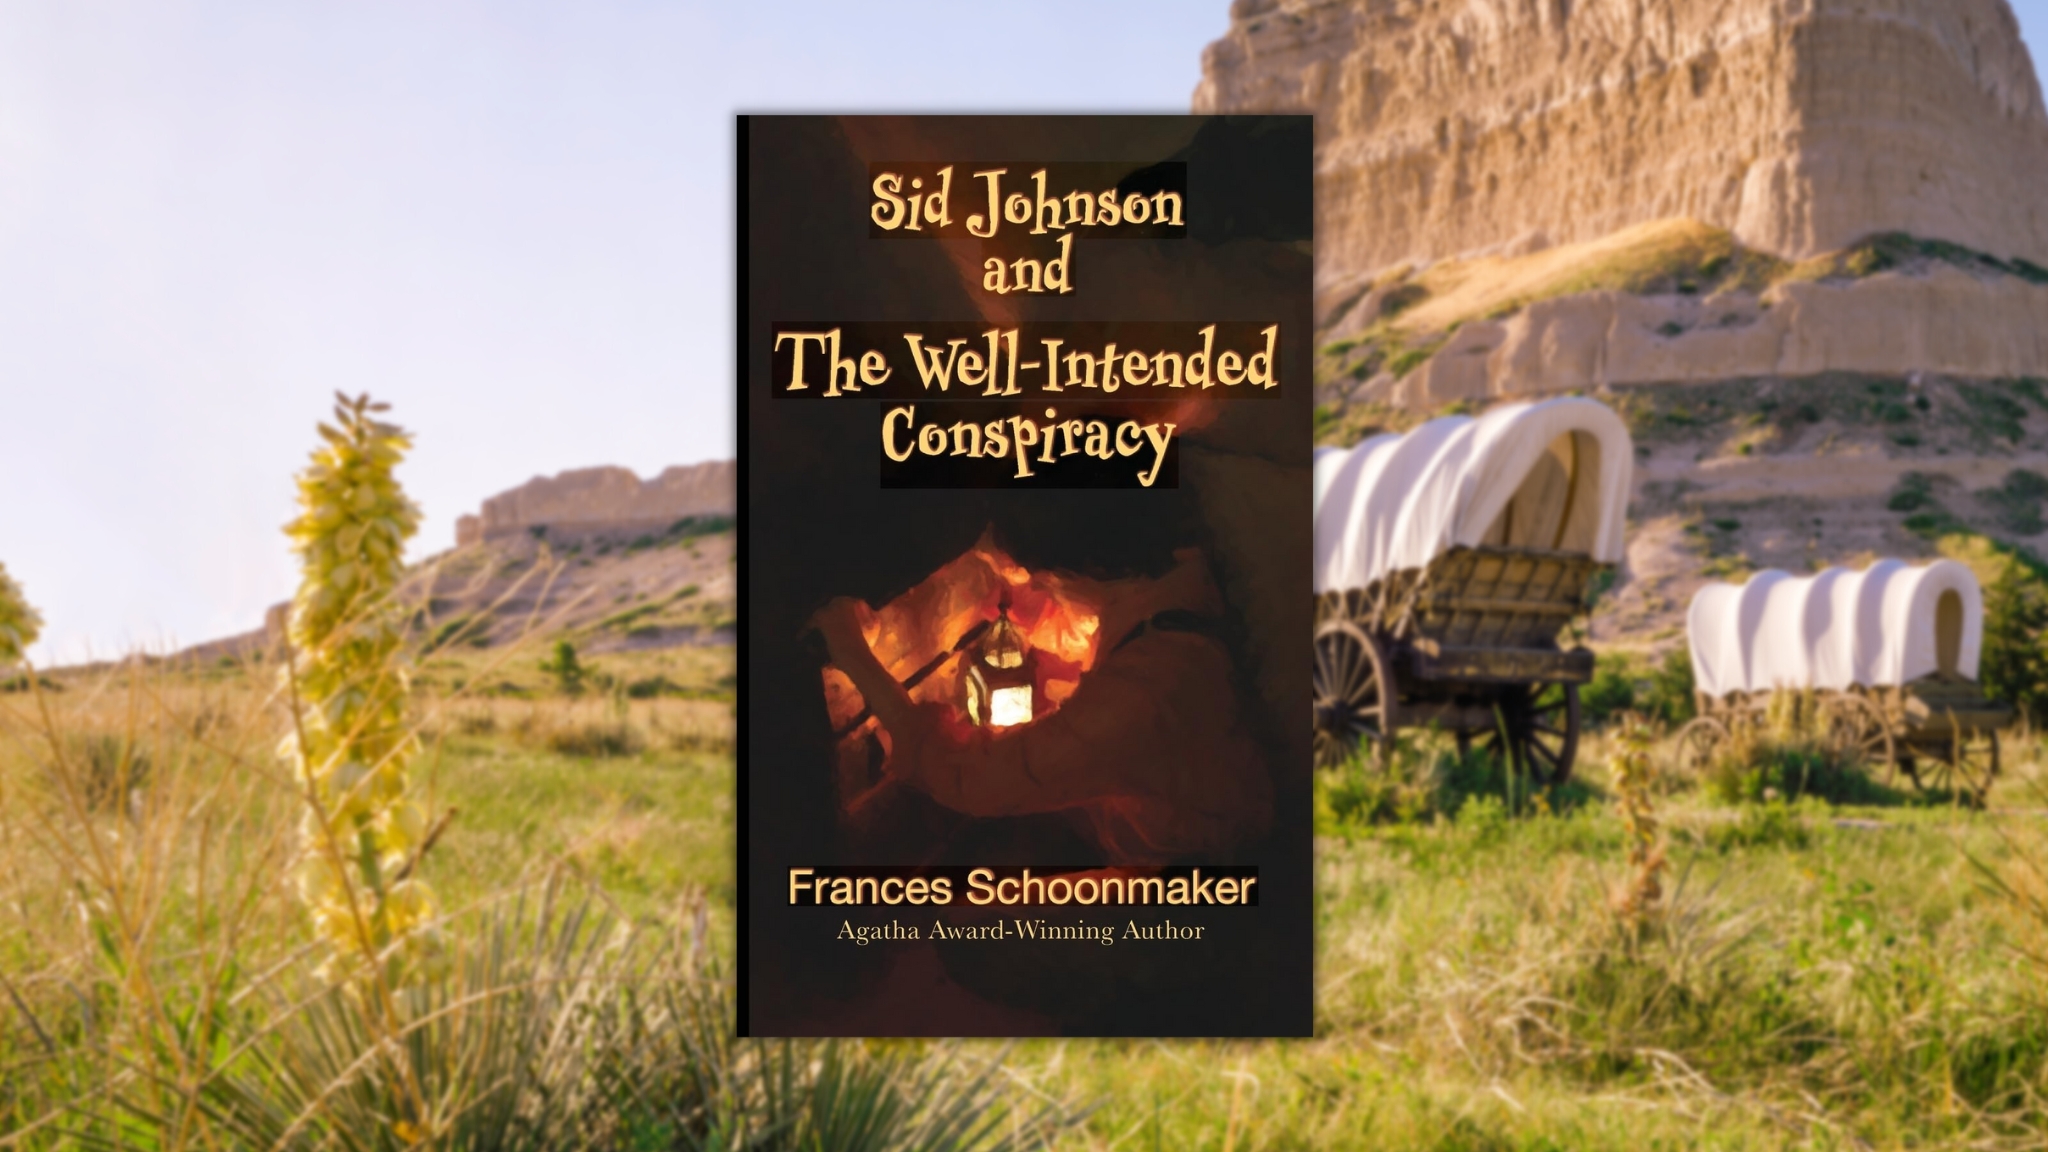 Sid Johnson and the Well-Intended Conspiracy by Frances Schoonmaker